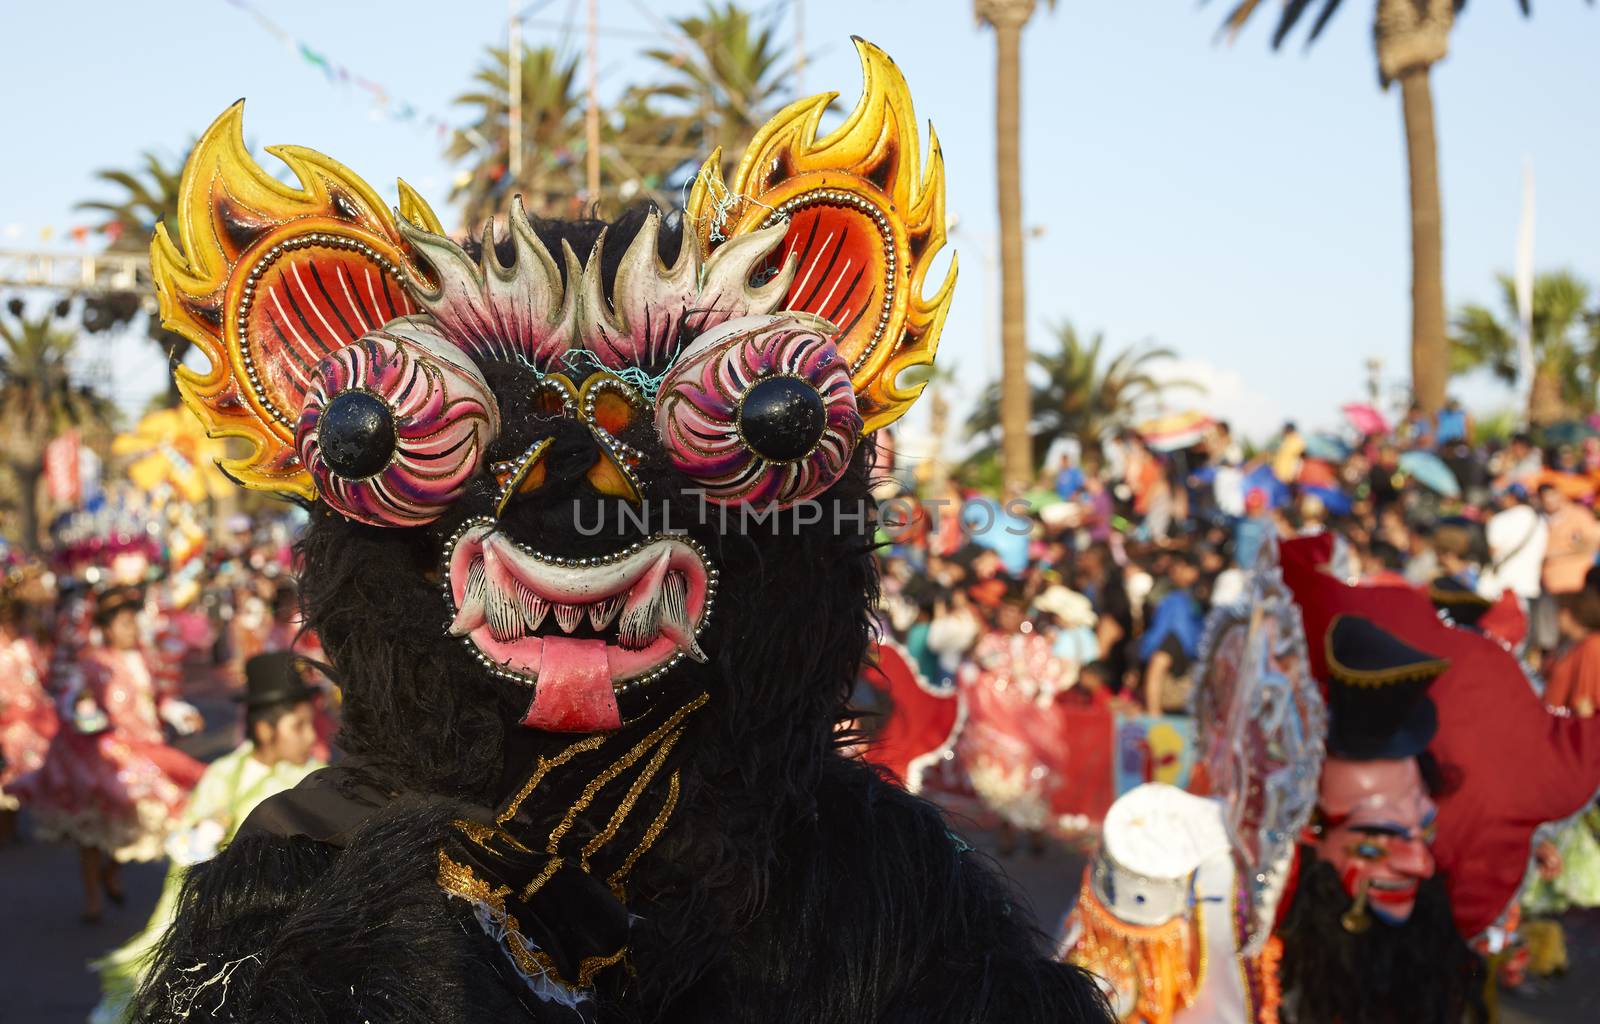 ARICA, CHILE - JANUARY 23, 2016: Morenada dance group in traditional Andean costume performing at the annual Carnaval Andino con la Fuerza del Sol in Arica, Chile.